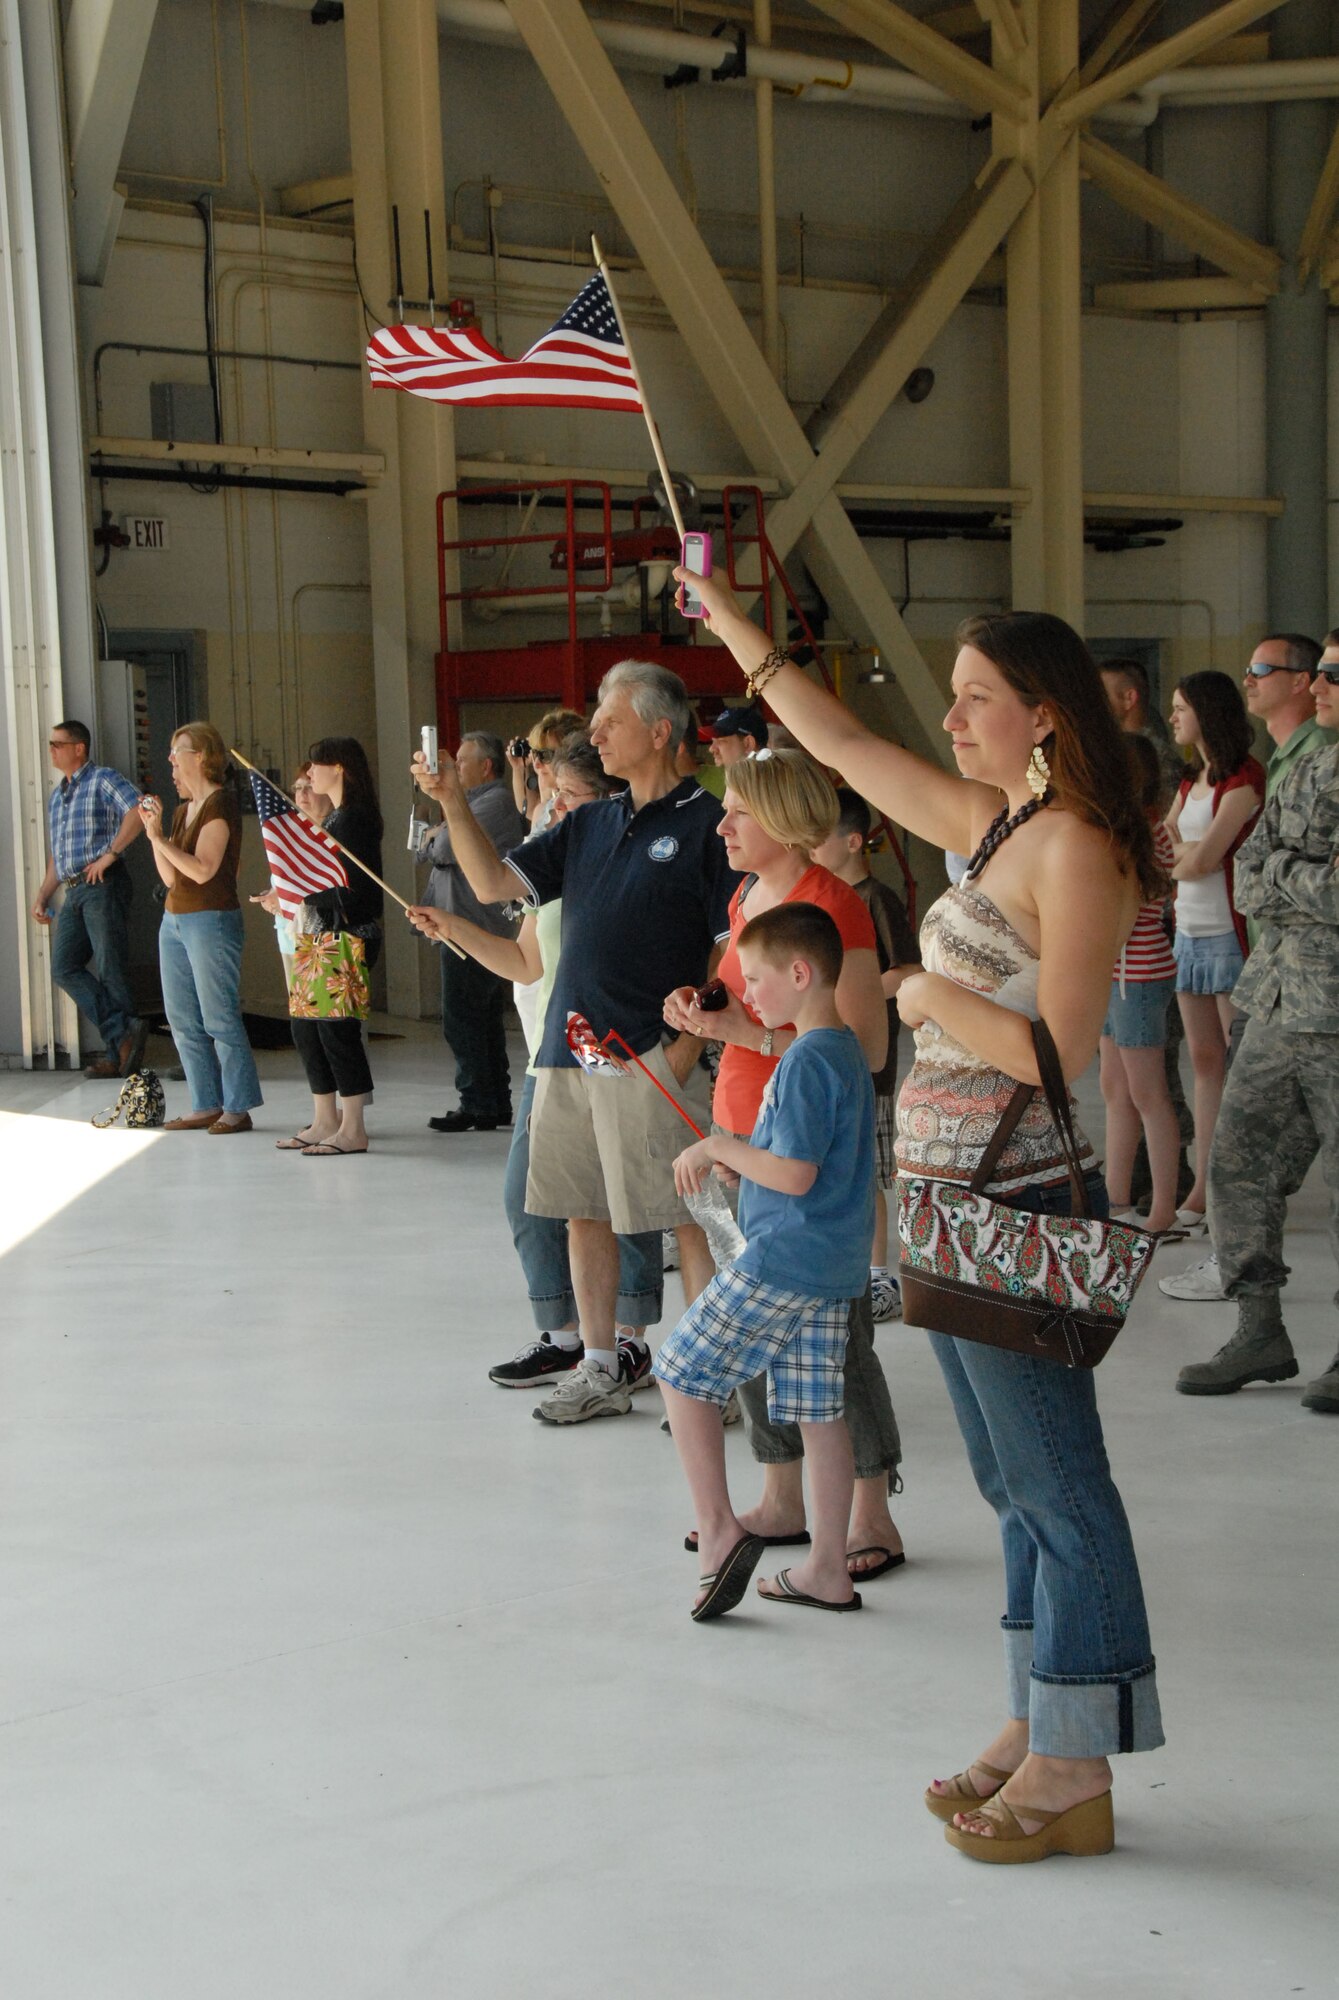 In a Memorial Day sendoff, family members and loved ones gather to bid farewell to members of the 107th Airlift Wing. The Airmen left Niagara Air Reserve Station for their four day journey aboard a C-130 that will eventually land them in Afghanistan for the start of their 90 day tour of duty. (U.S. Air Force photo/Tech Sgt. Catharine Peretta)